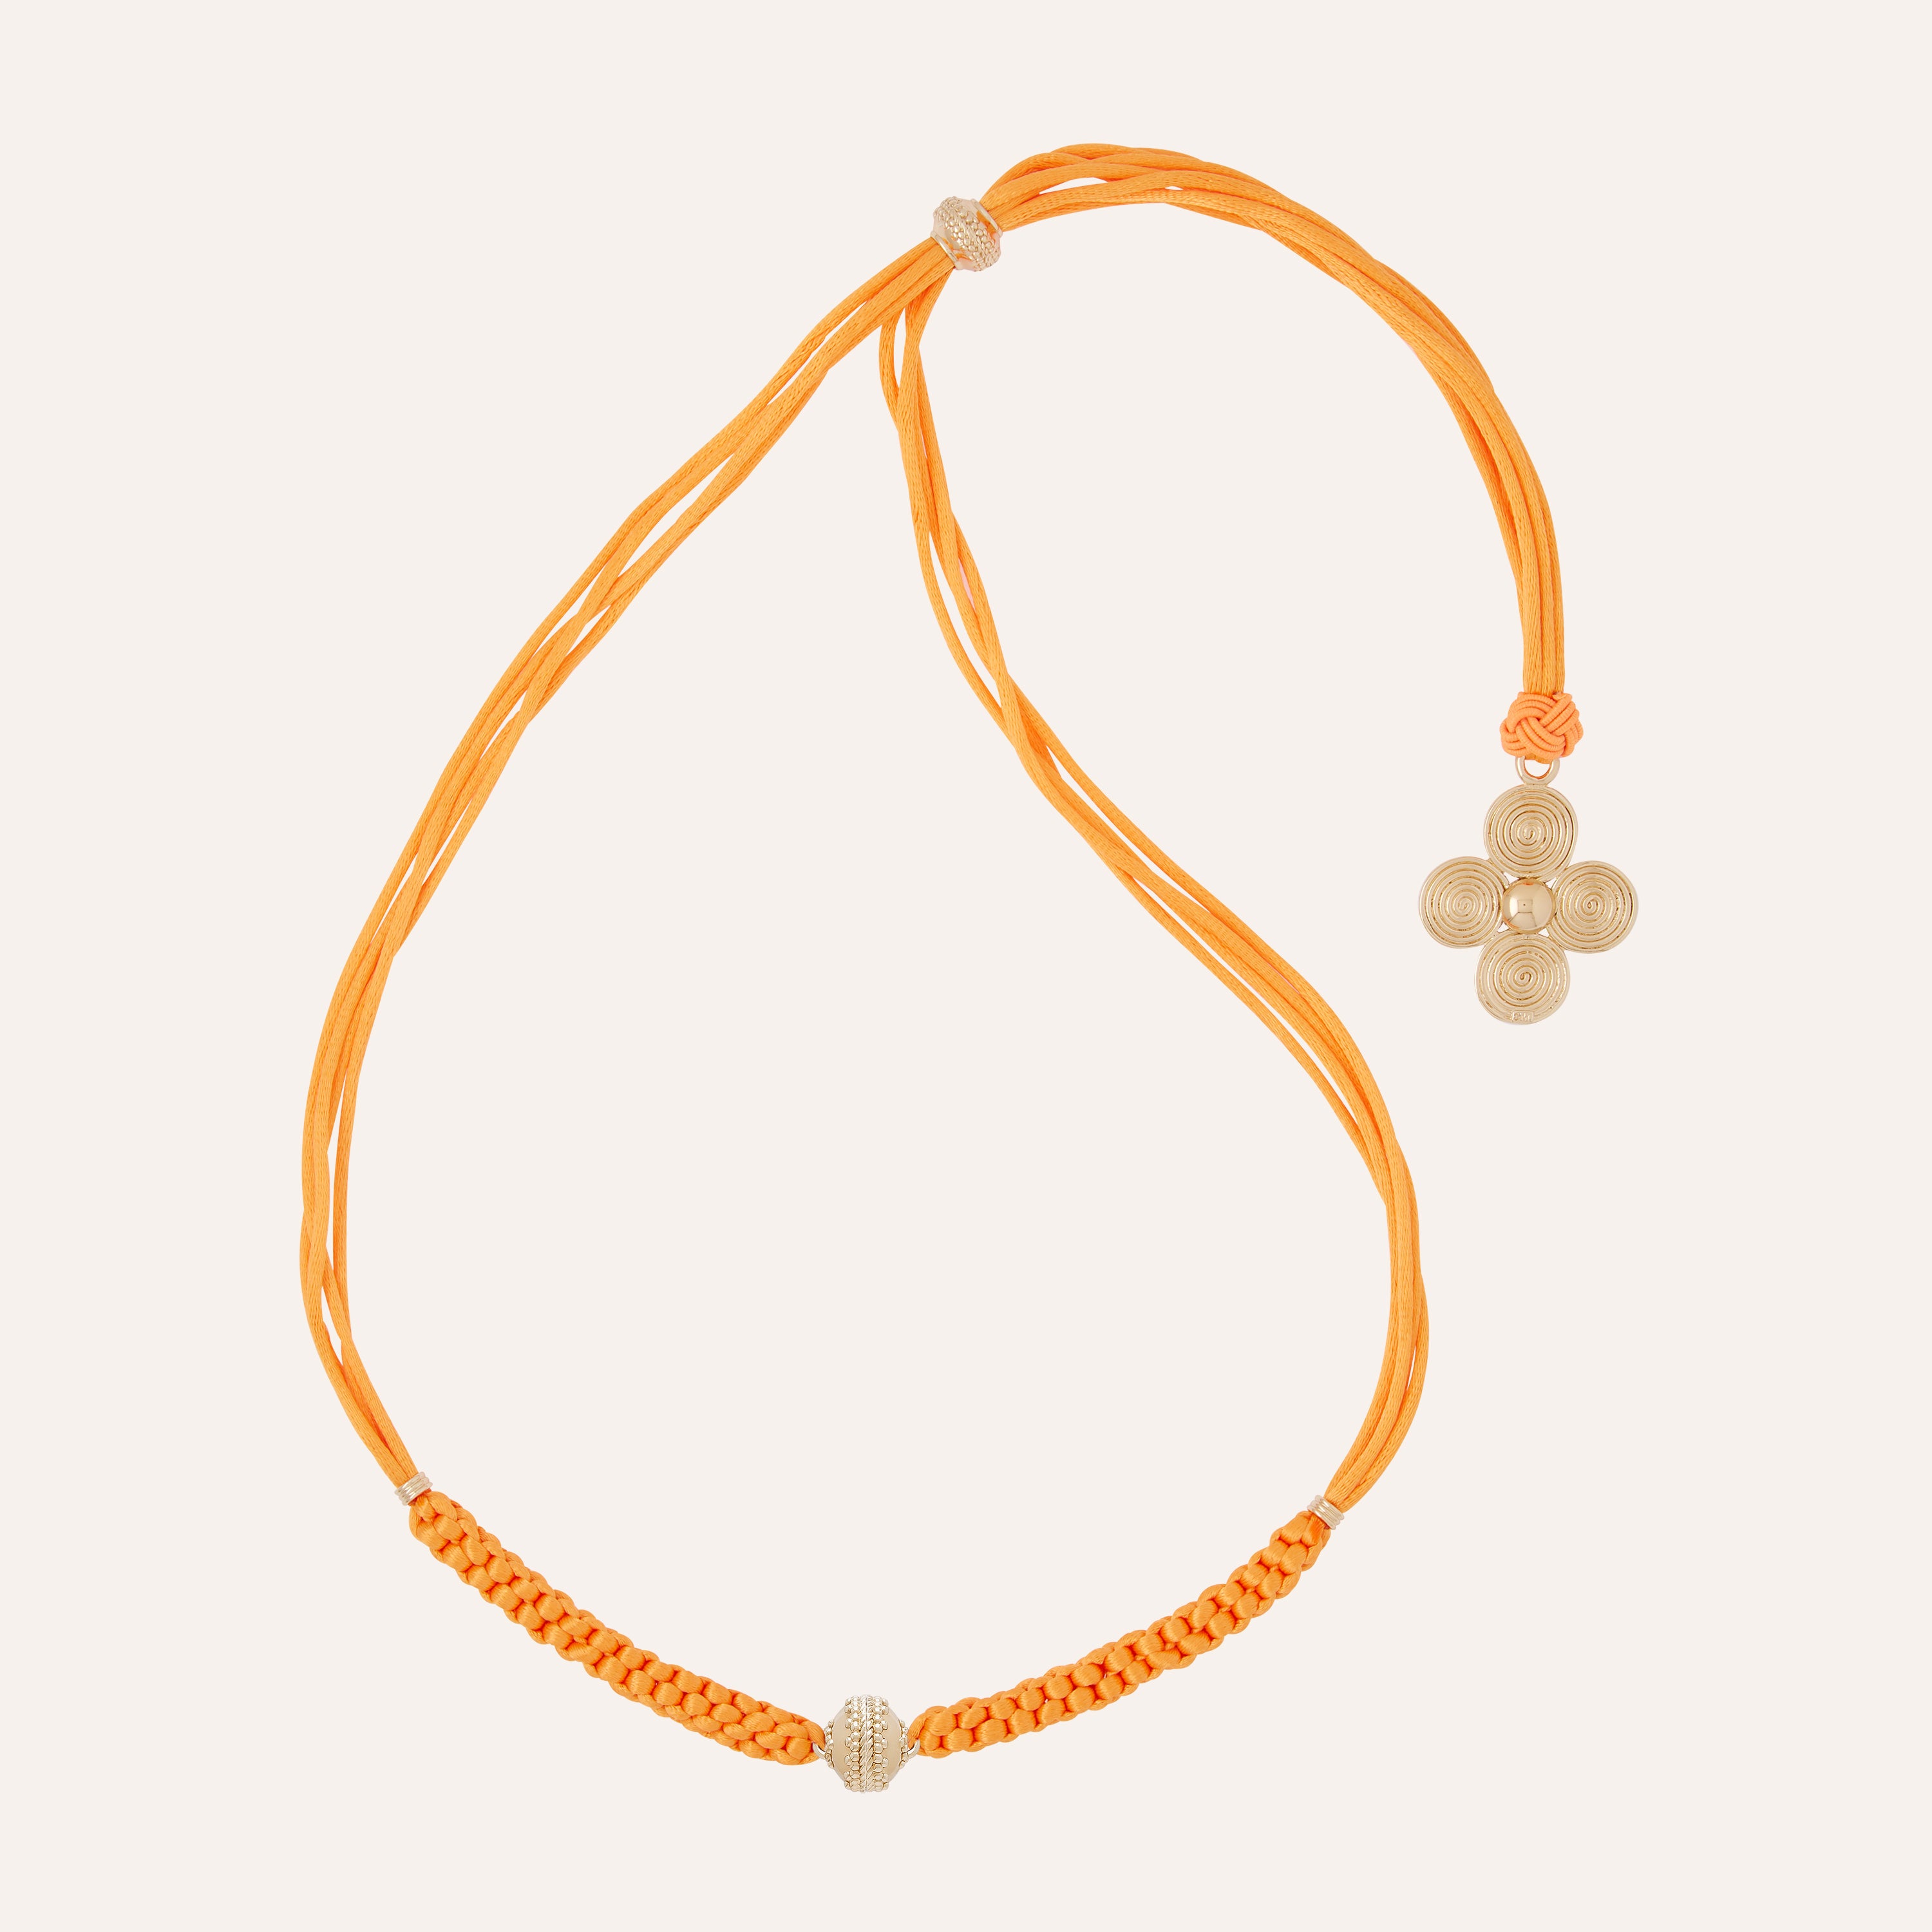 Knotted Heritage Petal Tangerine Necklace